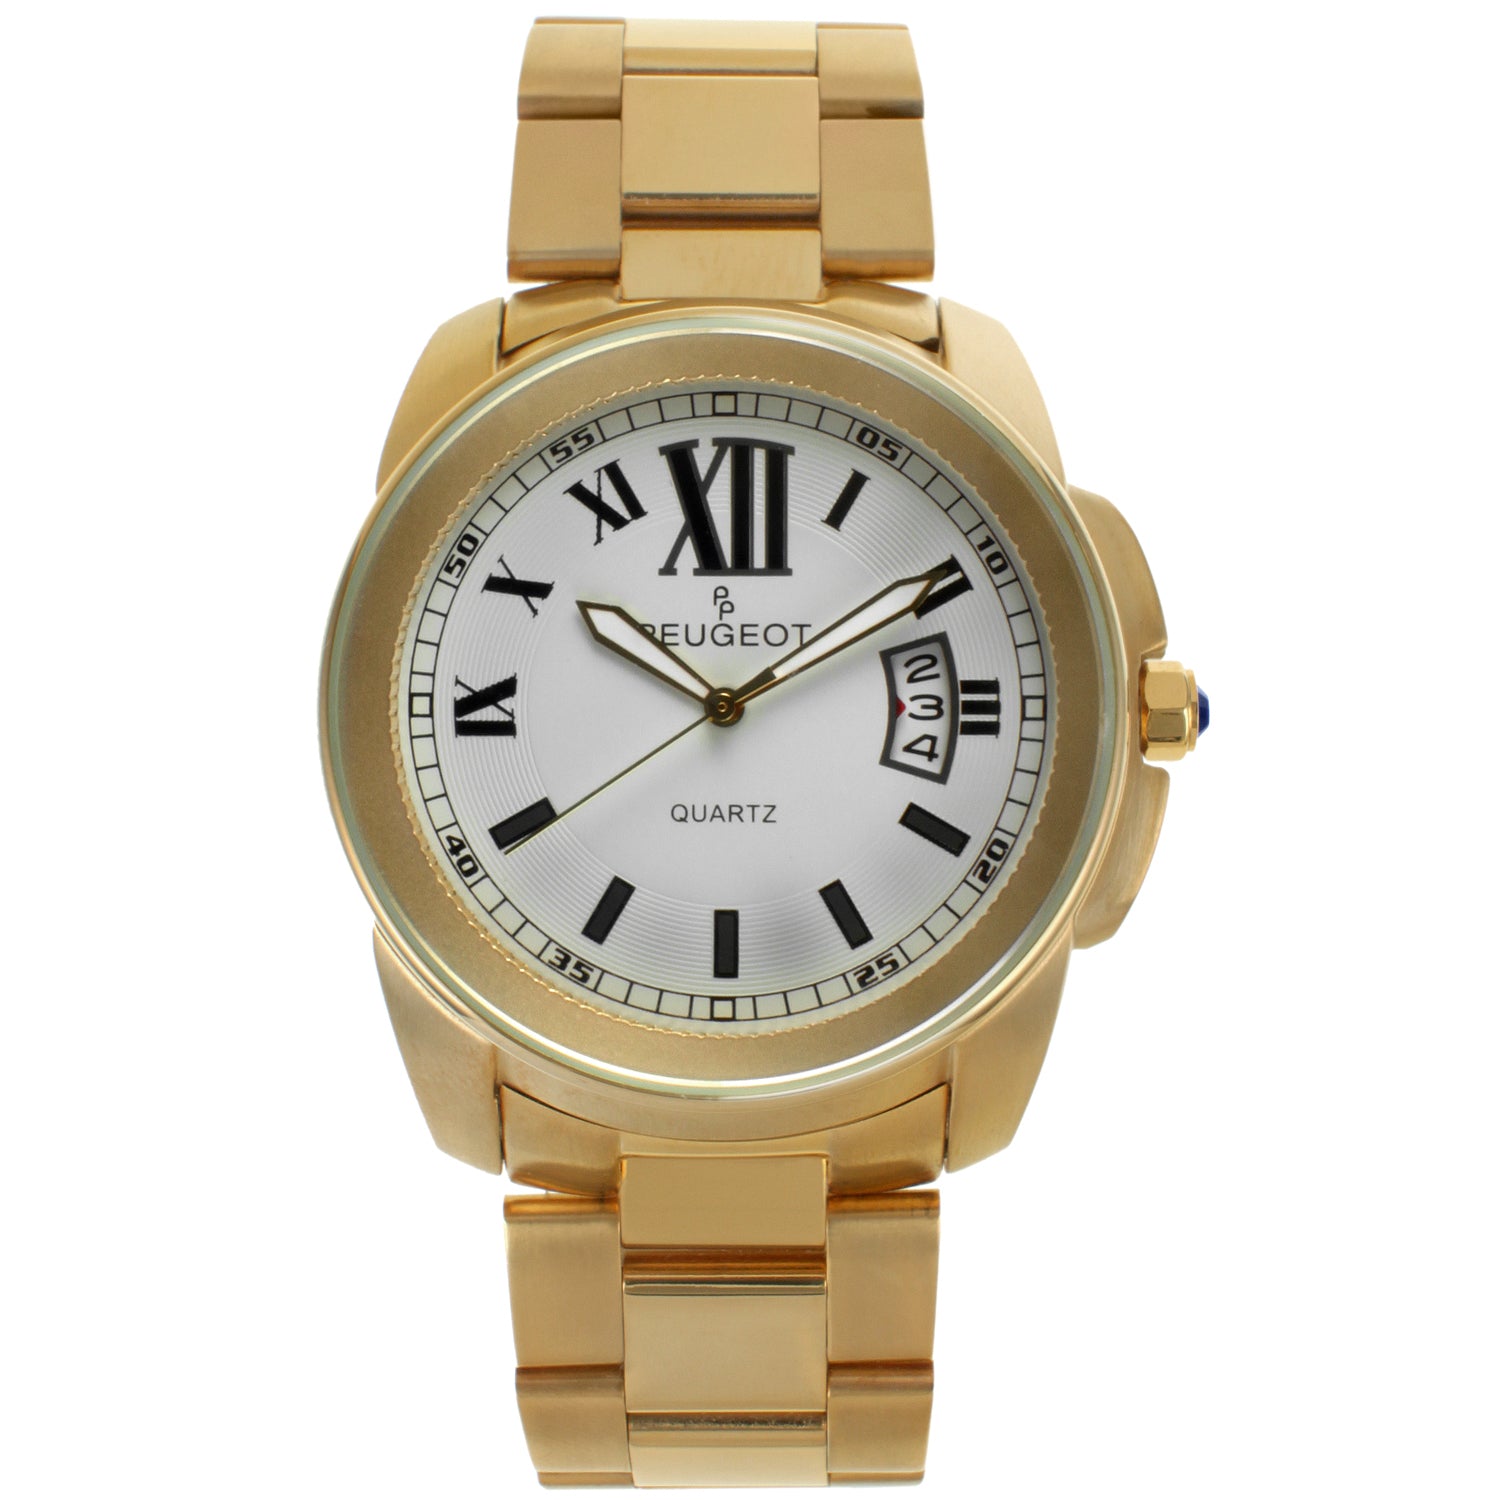 Round TITAN RAGA VIVA WHITE DIAL ANALOG METAL STRAP WATCH FOR WOMEN  2608SM01, For Daily at Rs 4695 in New Delhi